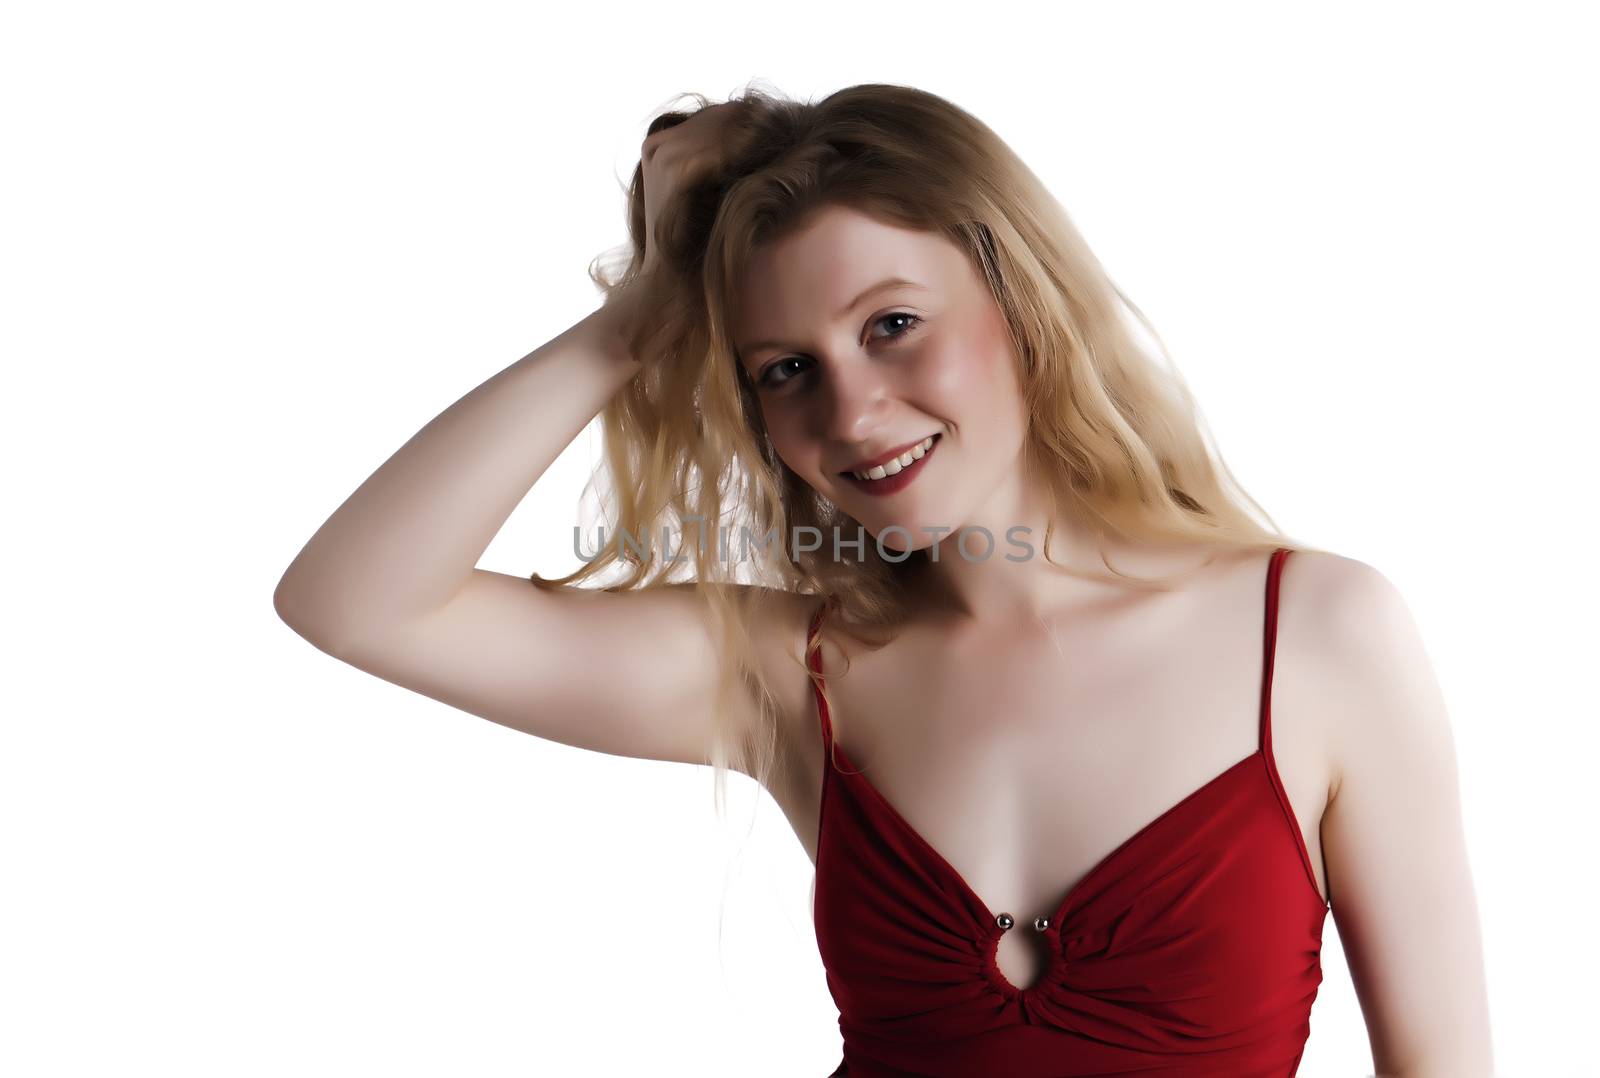 Fashionable blond woman over a white background.